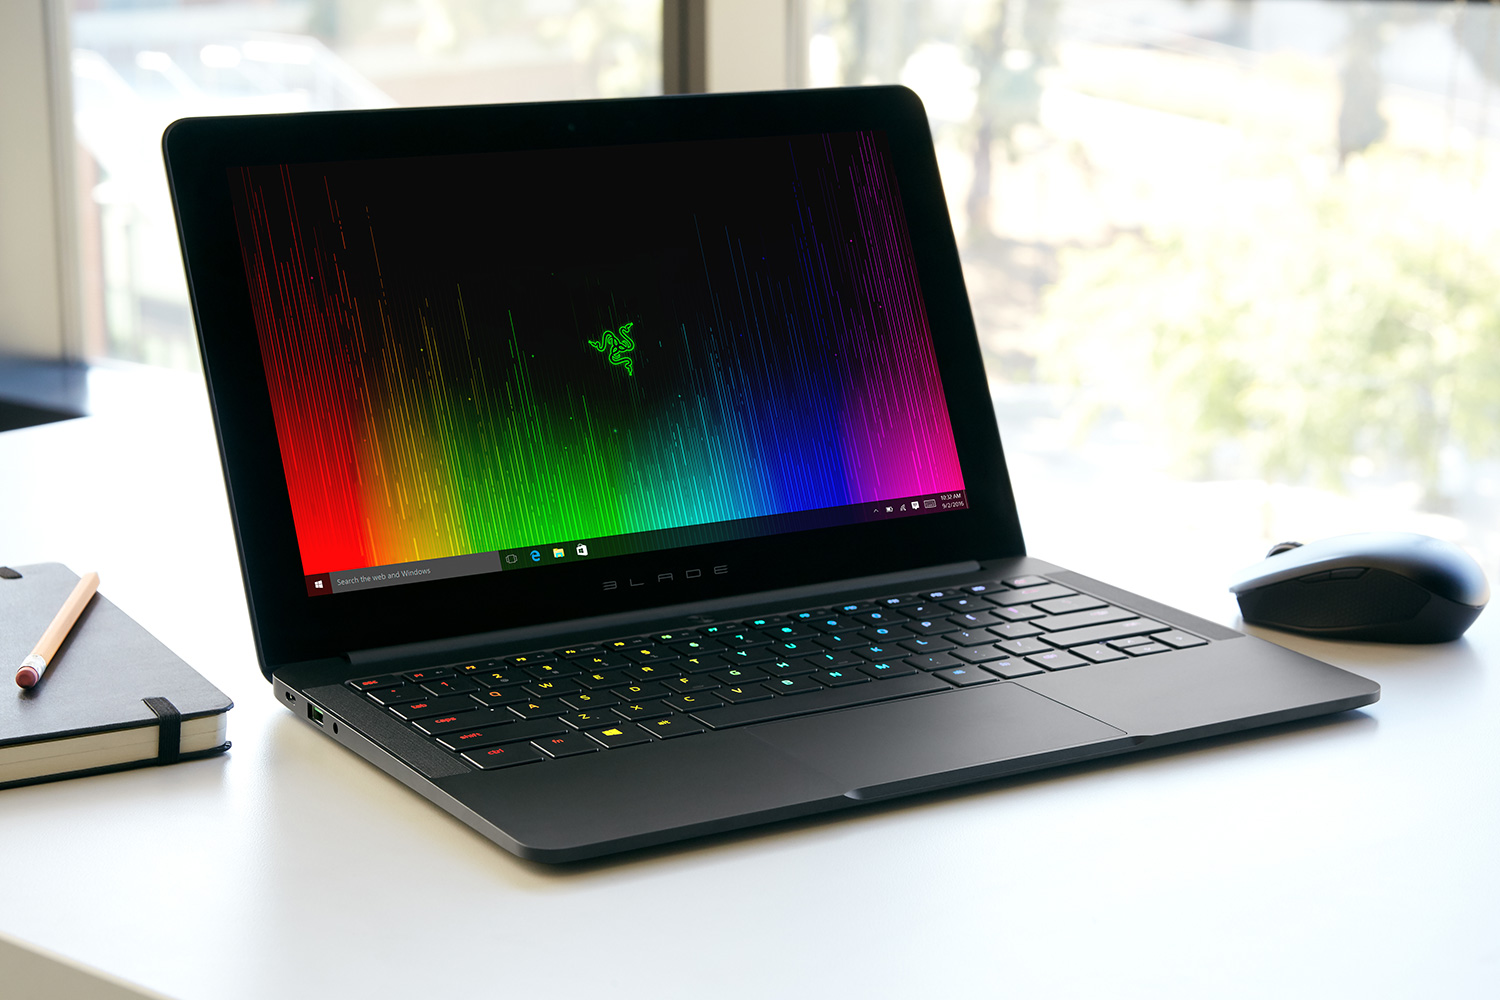 Razer: Blade Stealth Ultrabook updated with Kaby Lake CPU and bigger battery - NotebookCheck.net